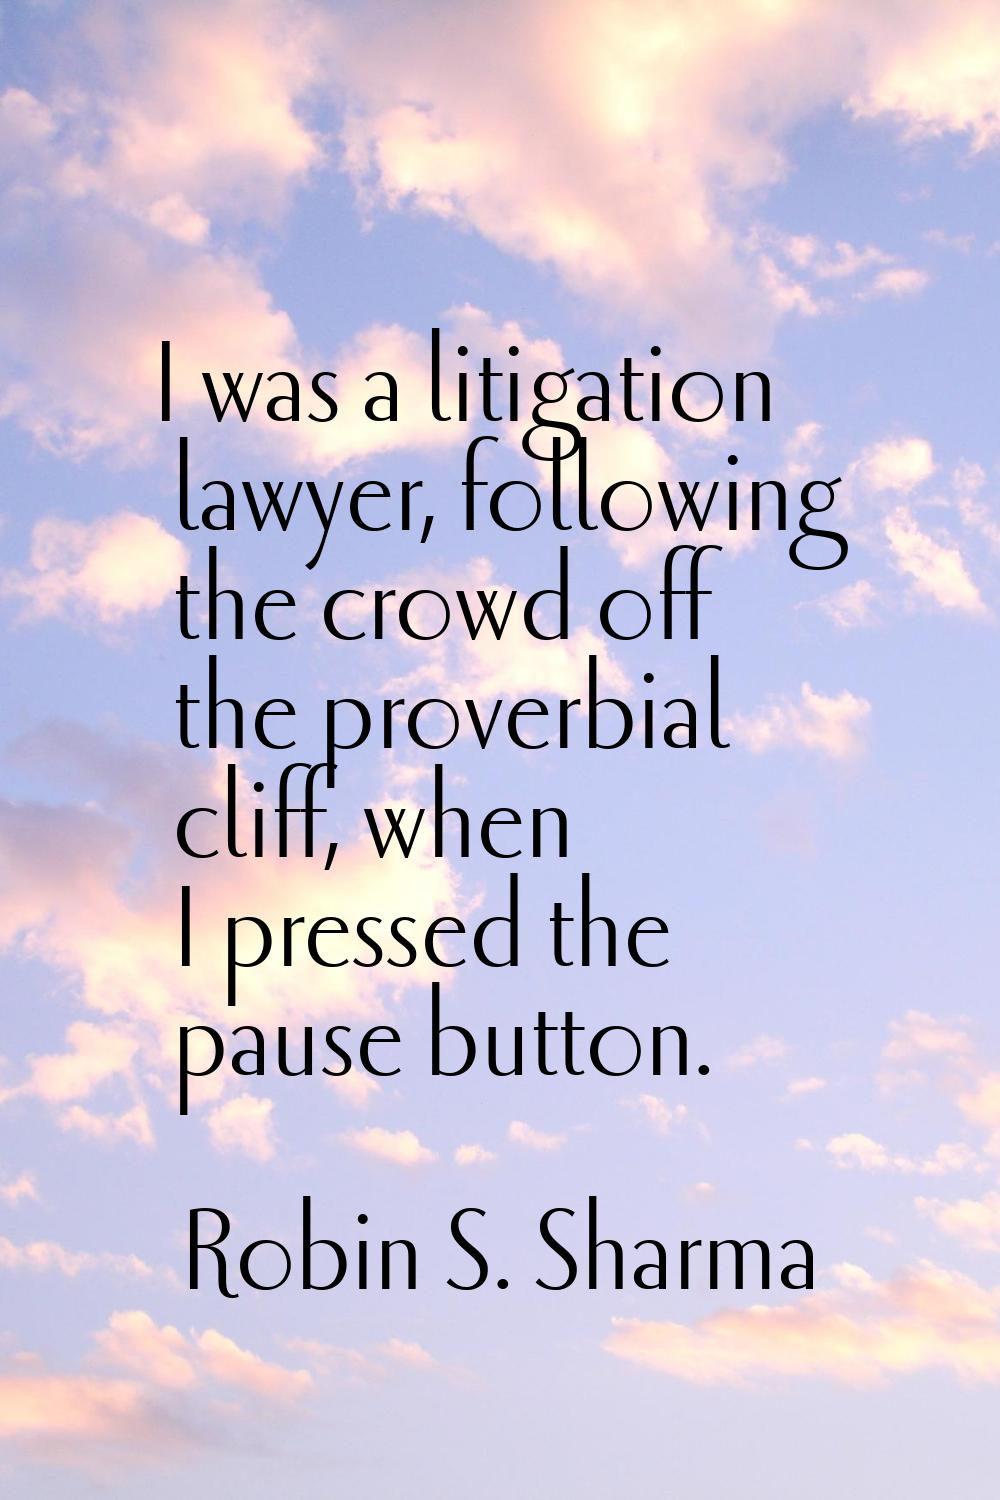 I was a litigation lawyer, following the crowd off the proverbial cliff, when I pressed the pause b